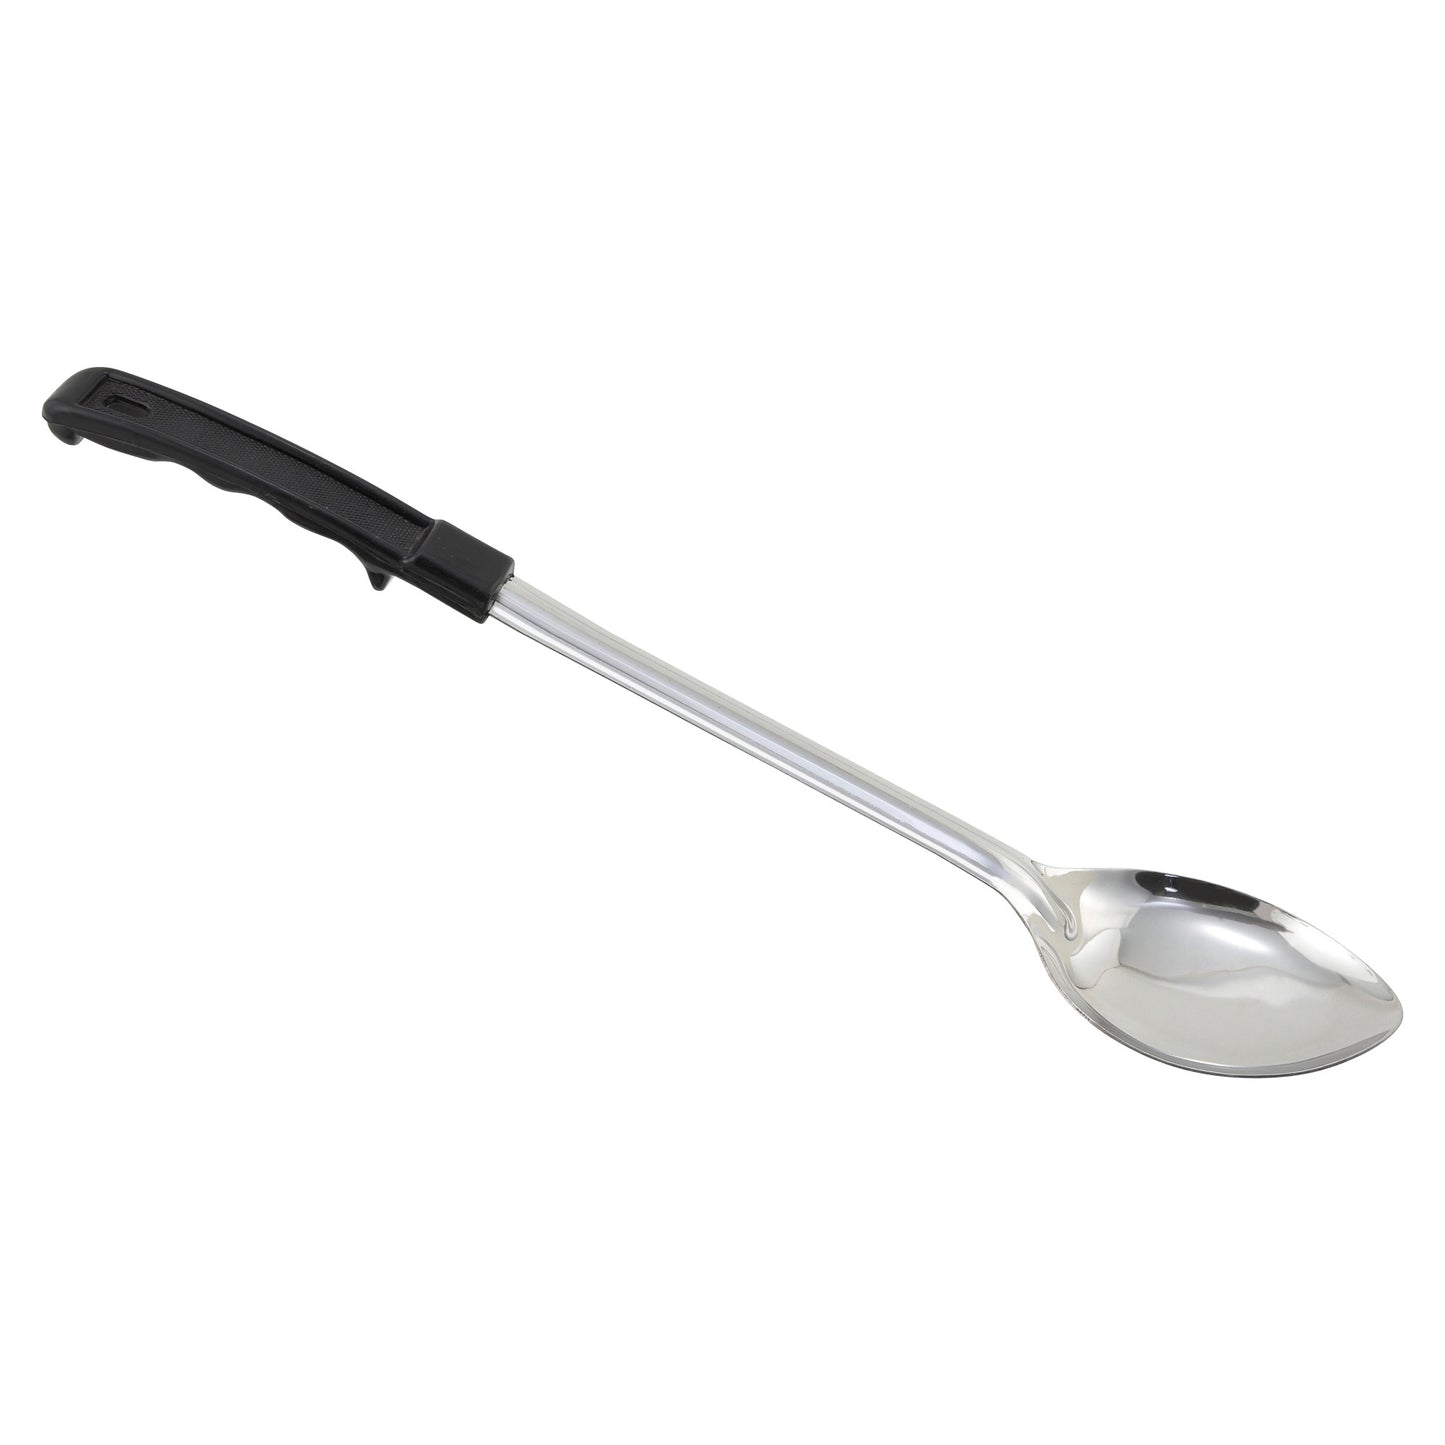 BHON-15 - Winco Prime Basting Spoon with Stop-Hook ABS Handle - Solid, 15"